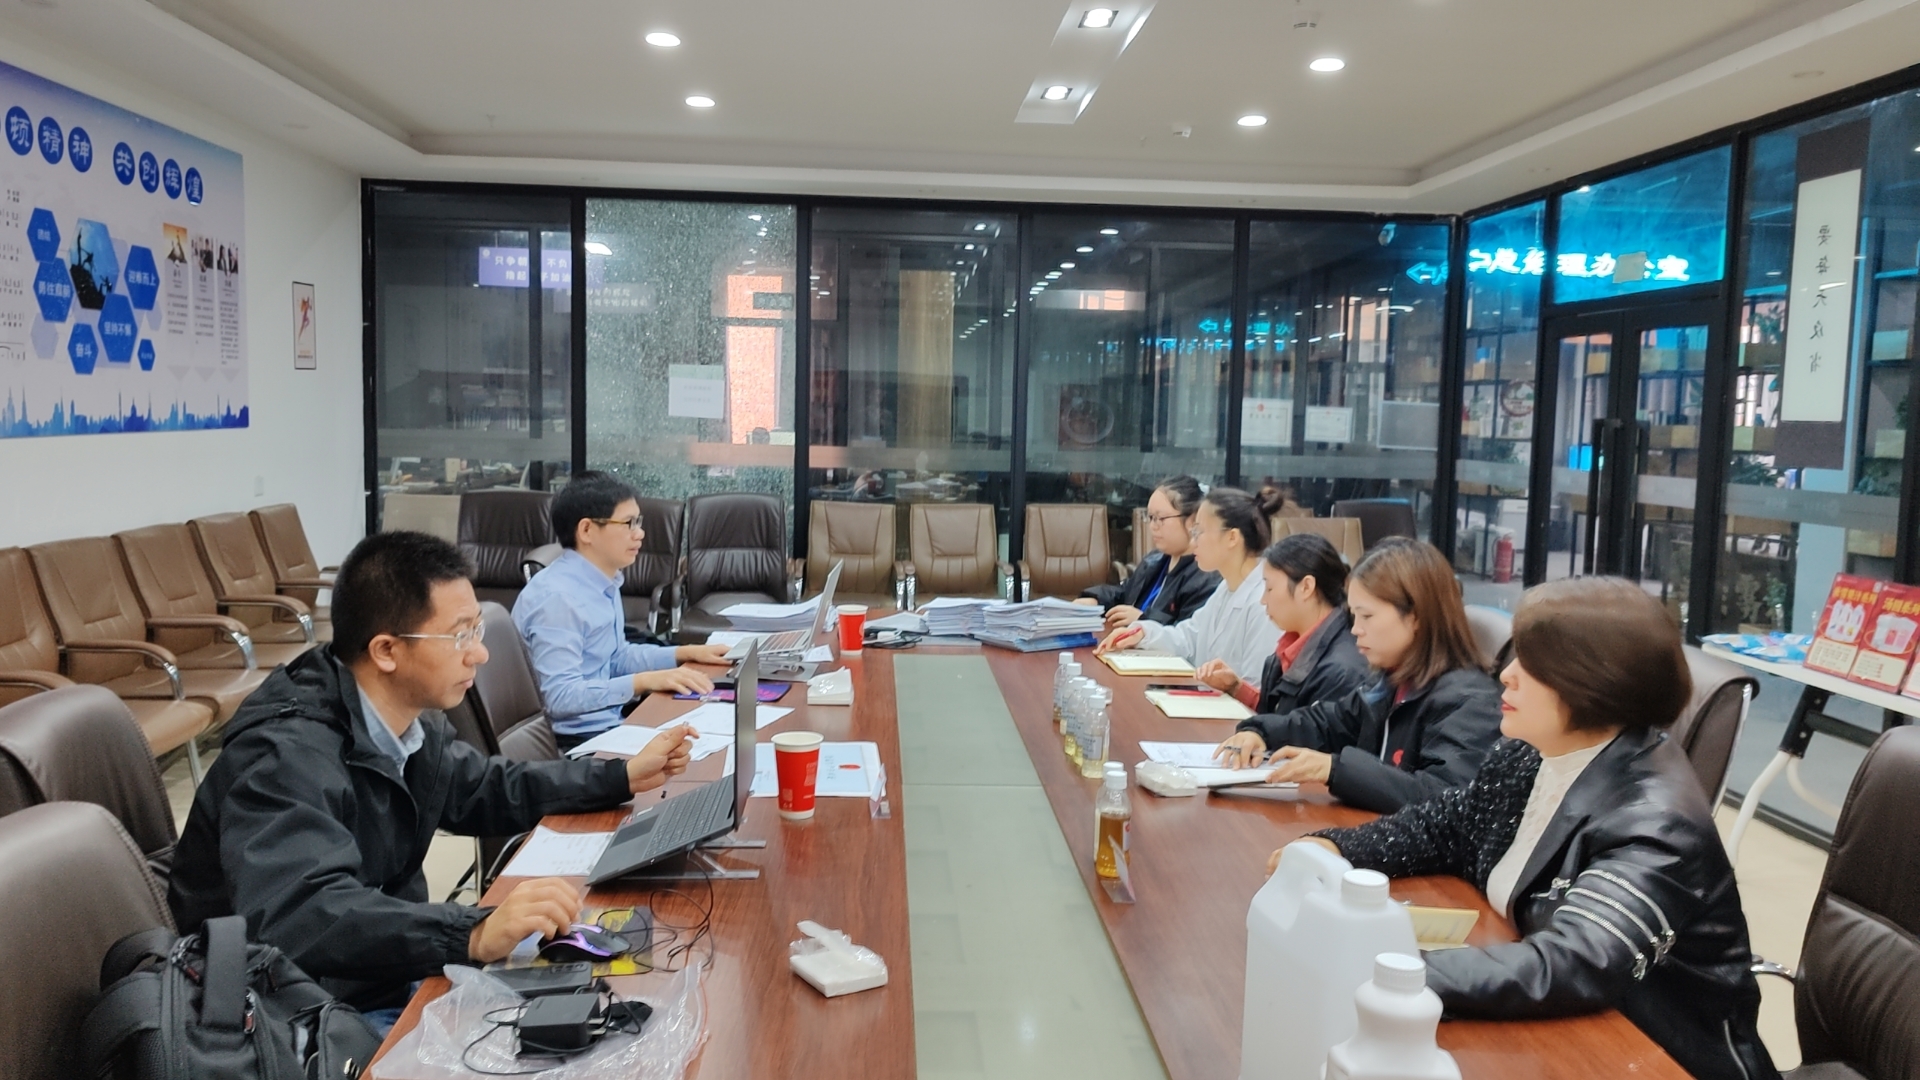 Chongqing Dunheng has obtained multiple food certifications